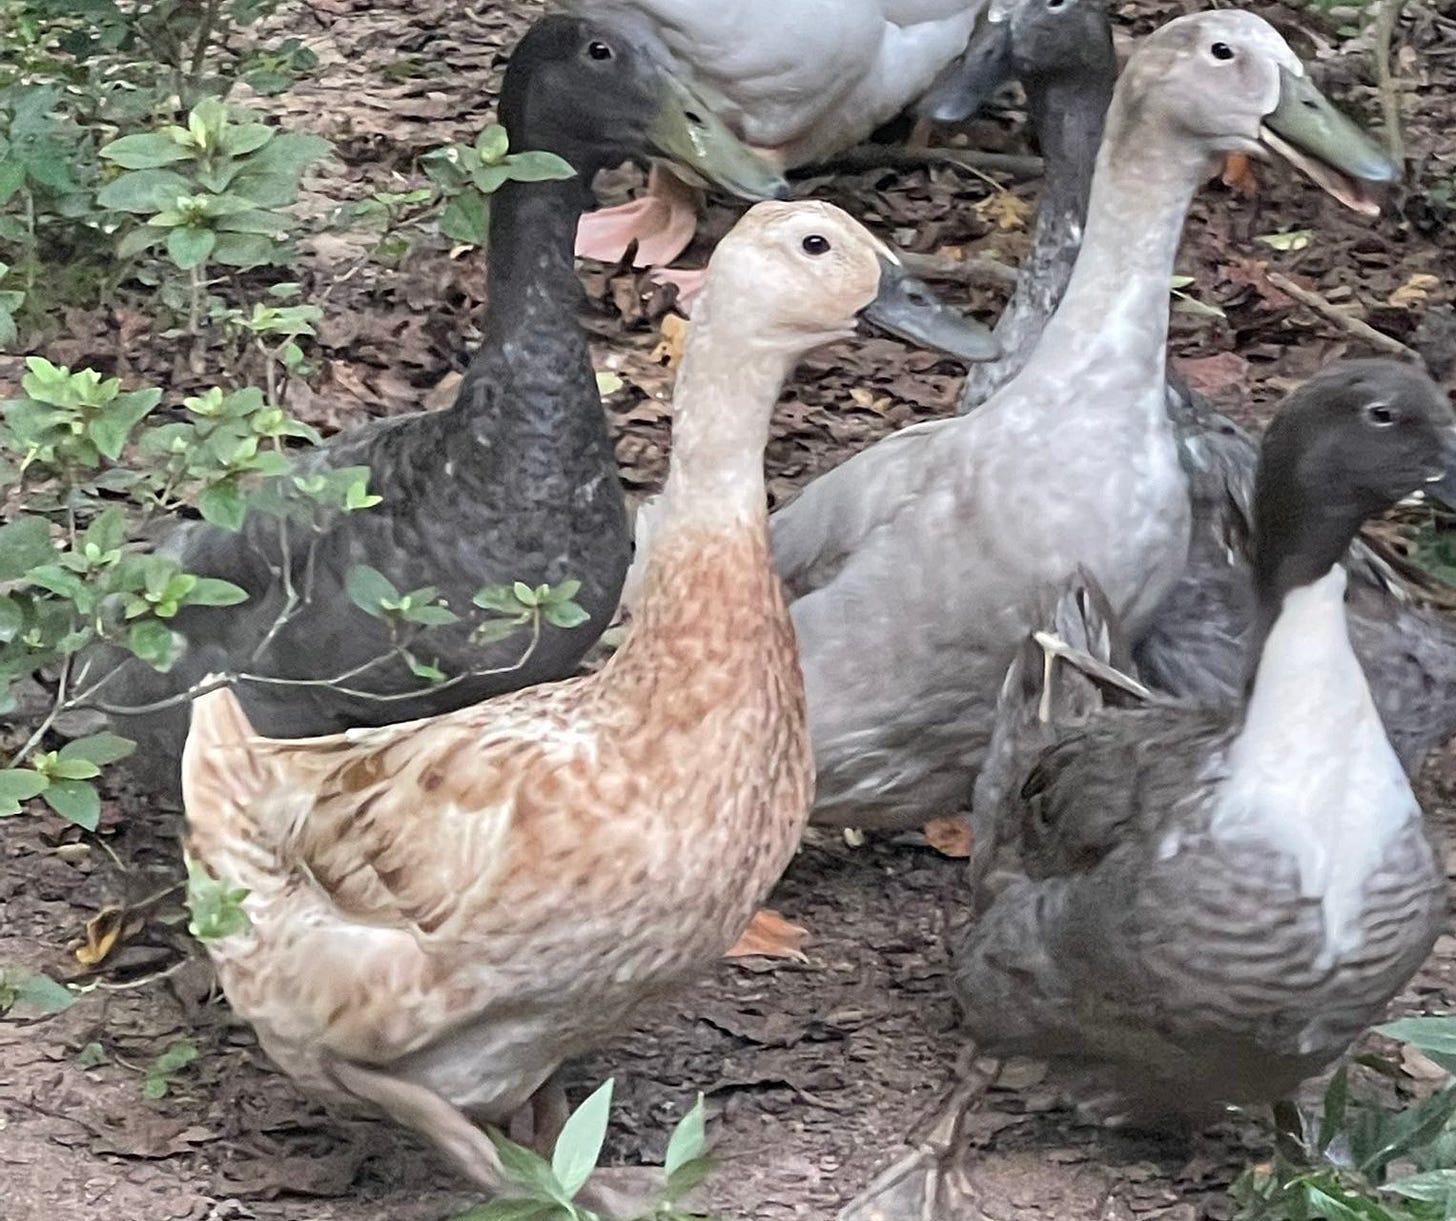 A cluster of several ducks of various colors